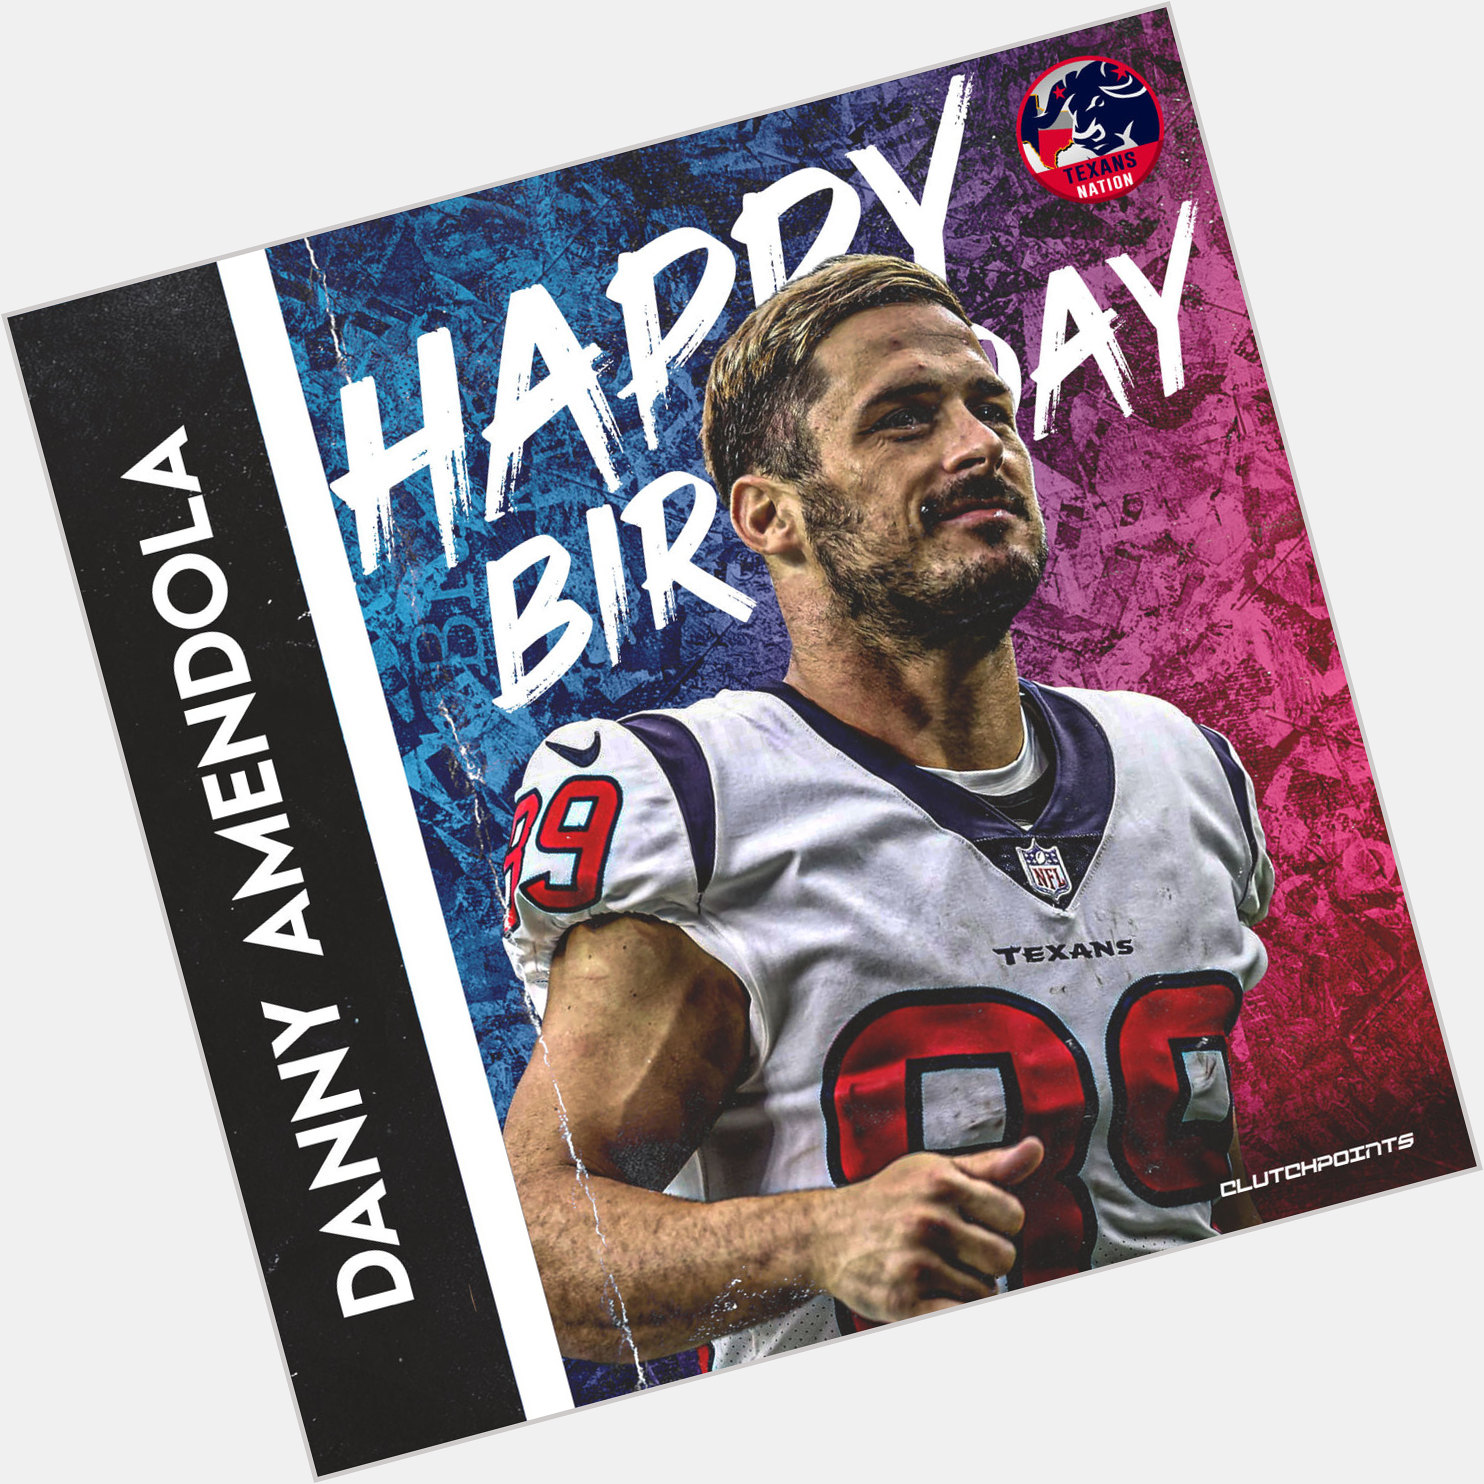 Join Texans Nation in wishing Danny Amendola a happy 36th birthday!  